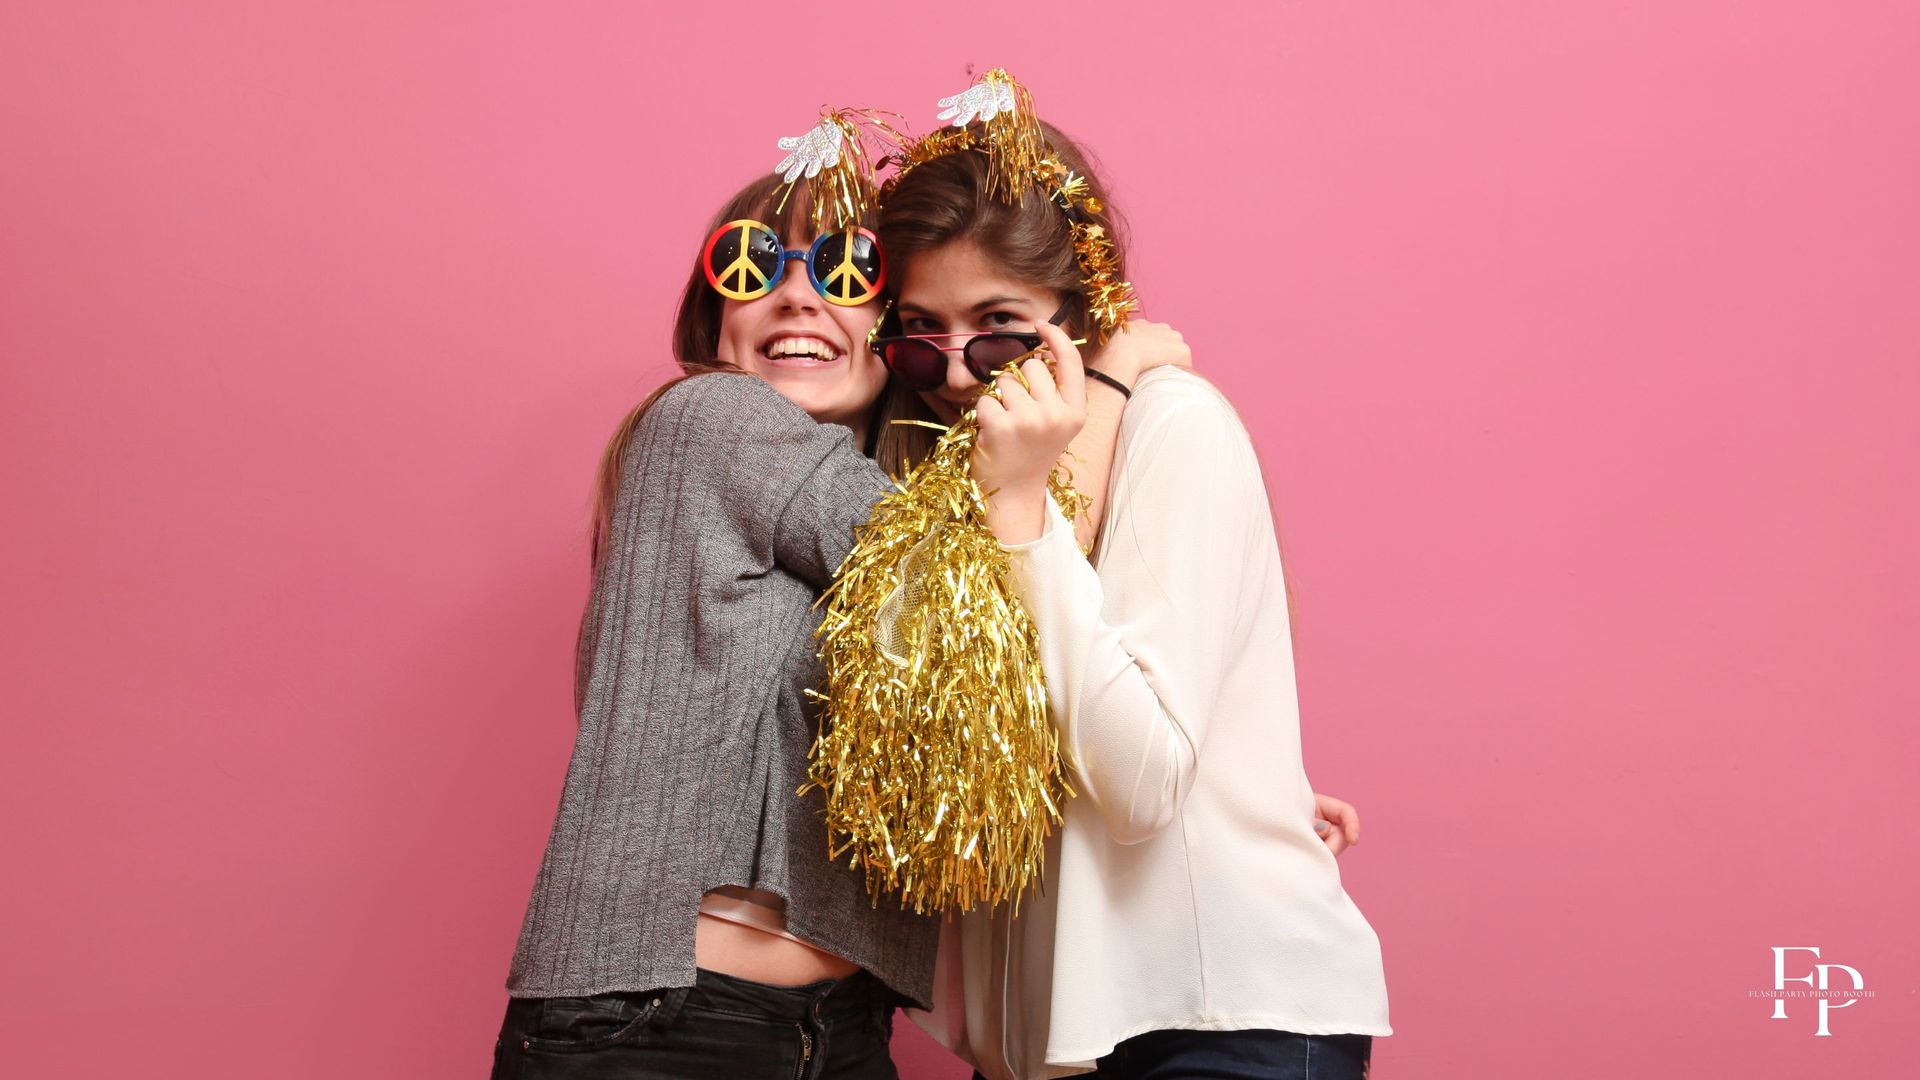 With all the excitement of a birthday party in full swing, two friends share a lighthearted moment at the photo booth rental in DFW, their smiles infectious and their spirits high.